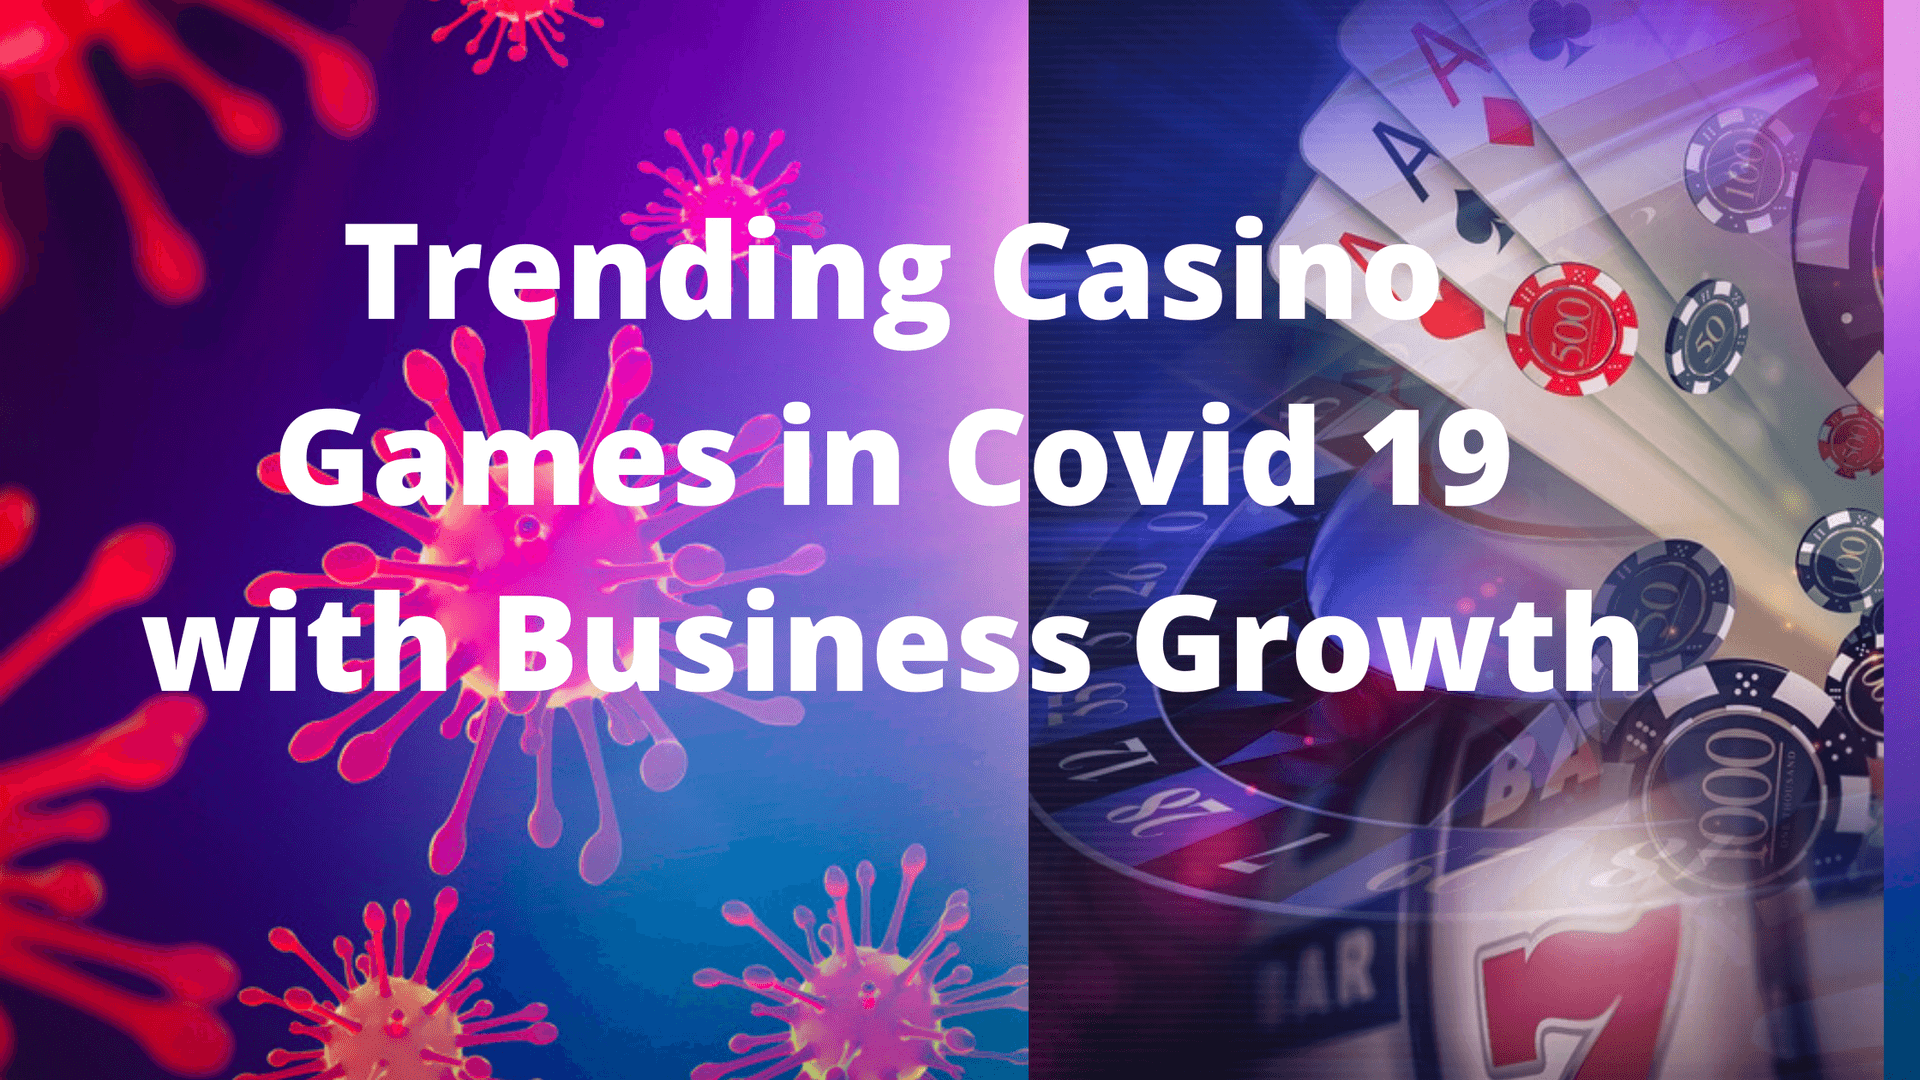 Trending Casino Games in Covid 19 with Business Growth